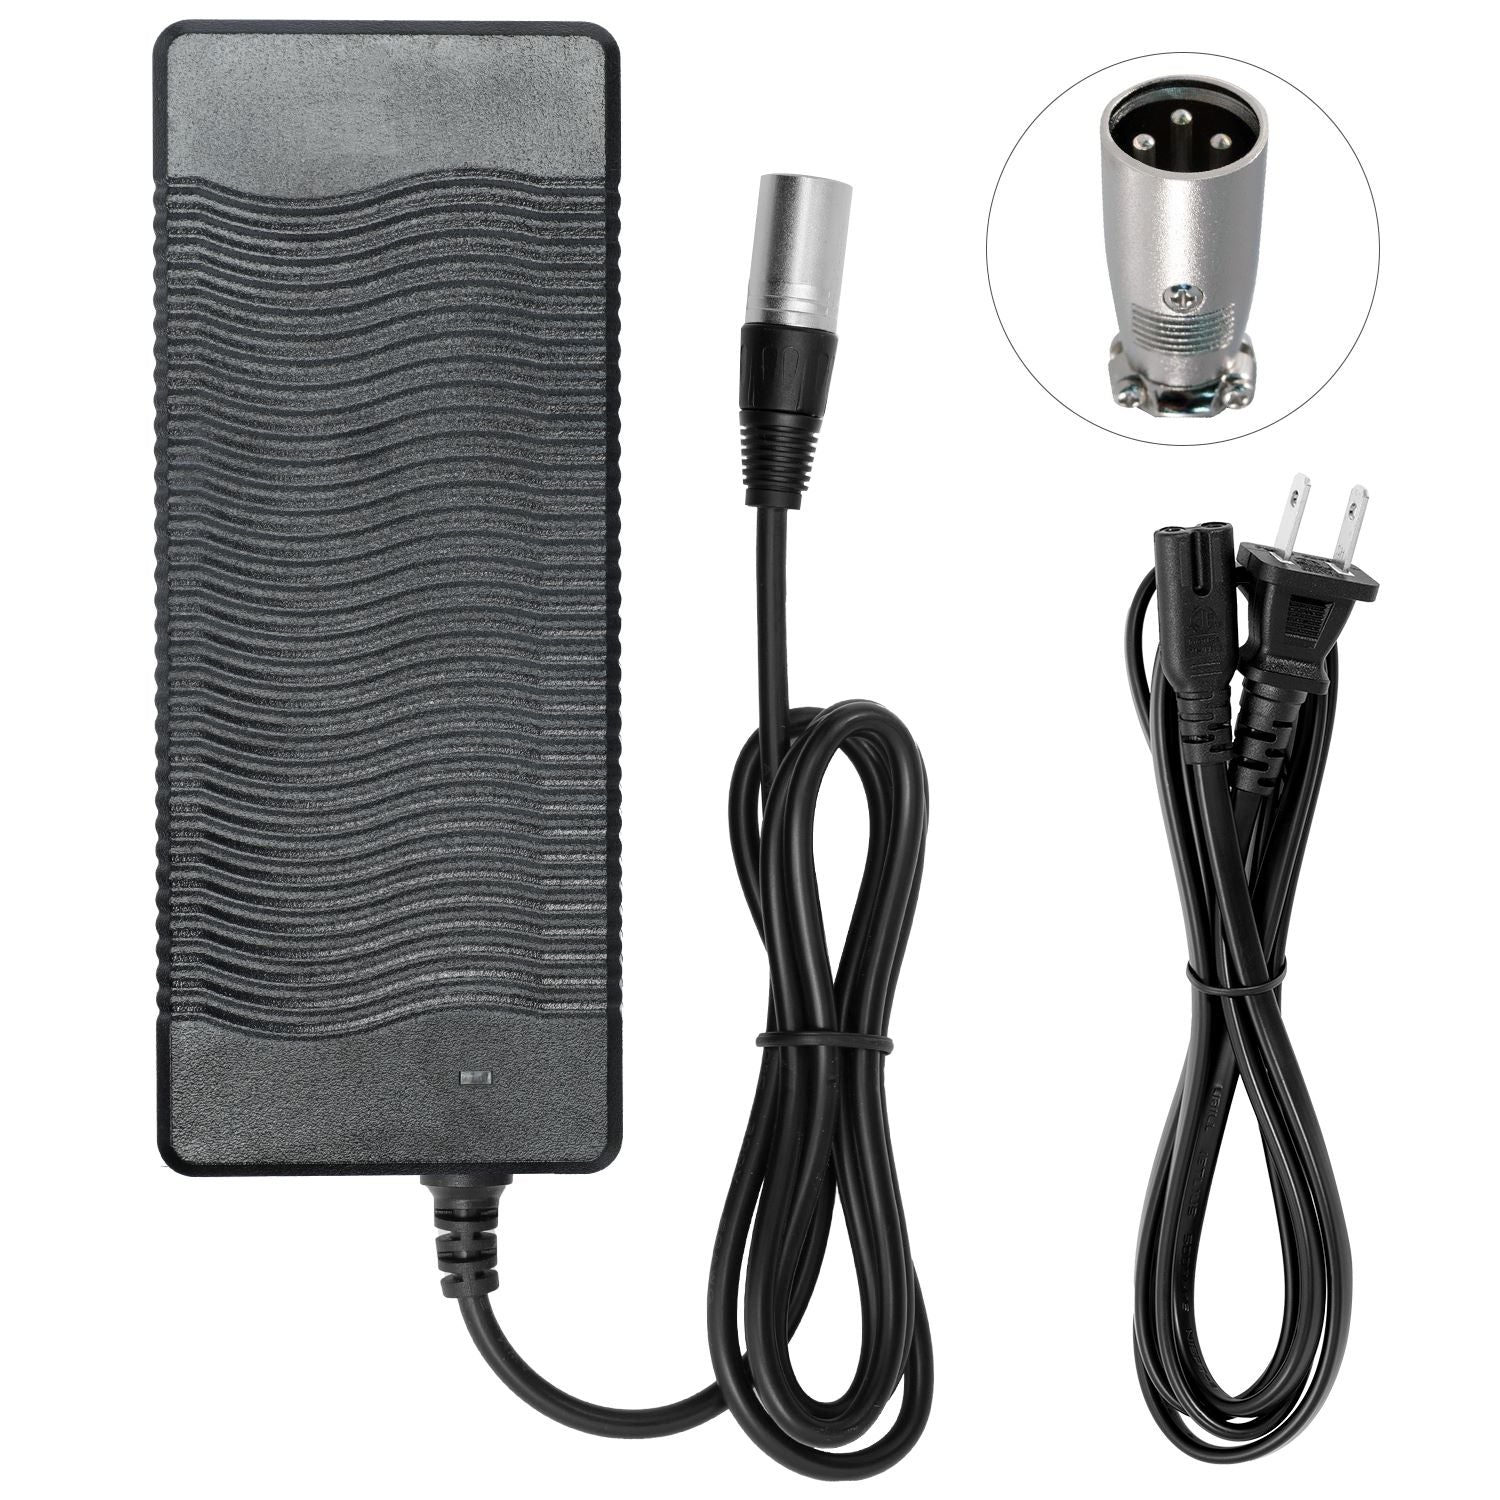 Charger for Pedego Comfort Cruiser eBike